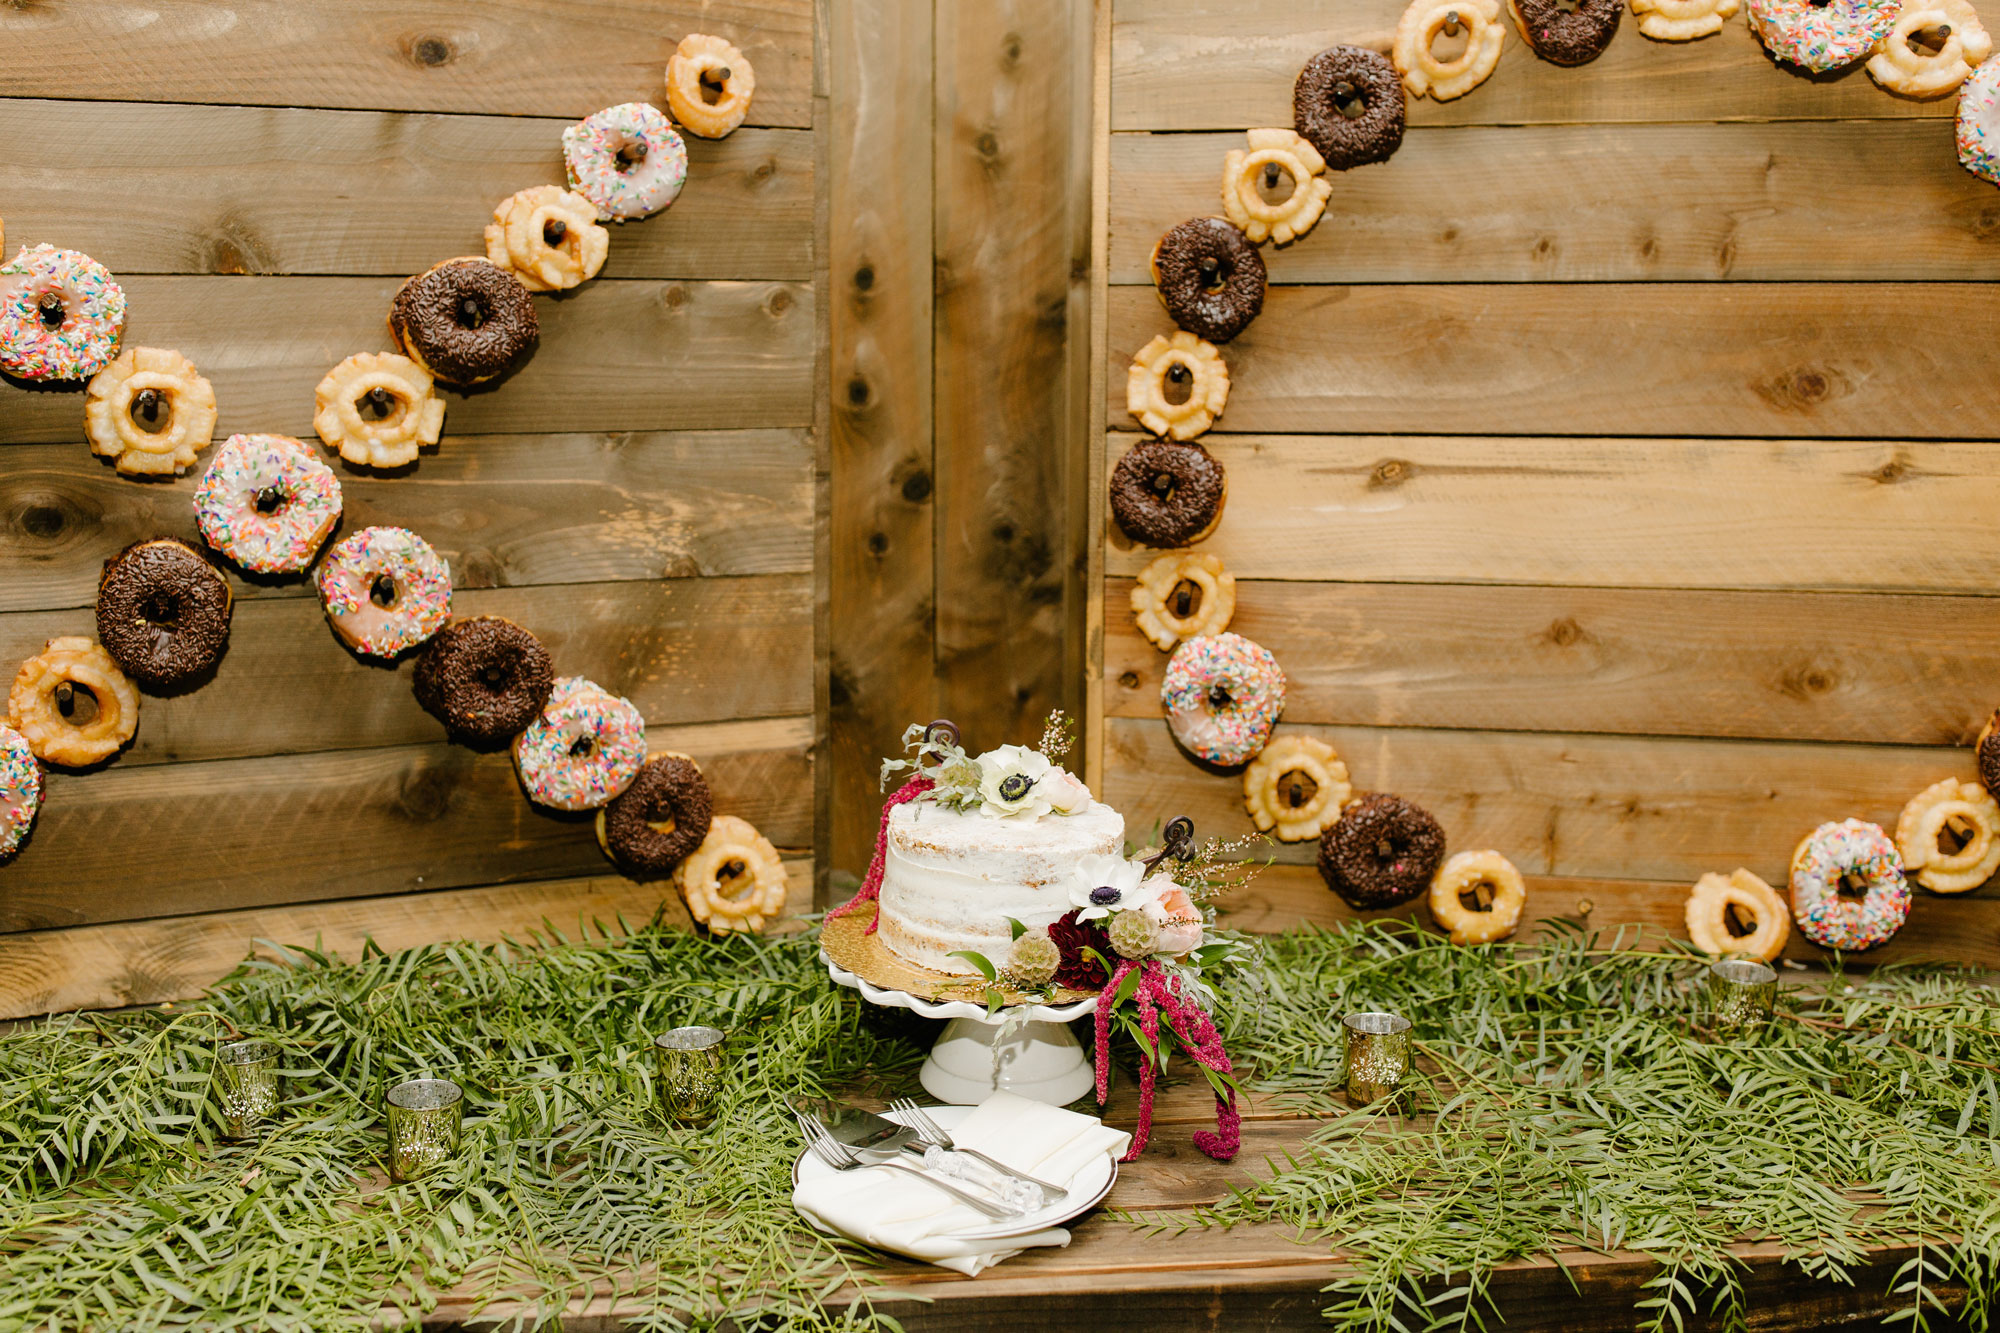 Scrumptious Cake Table with Donuts spelling X and O